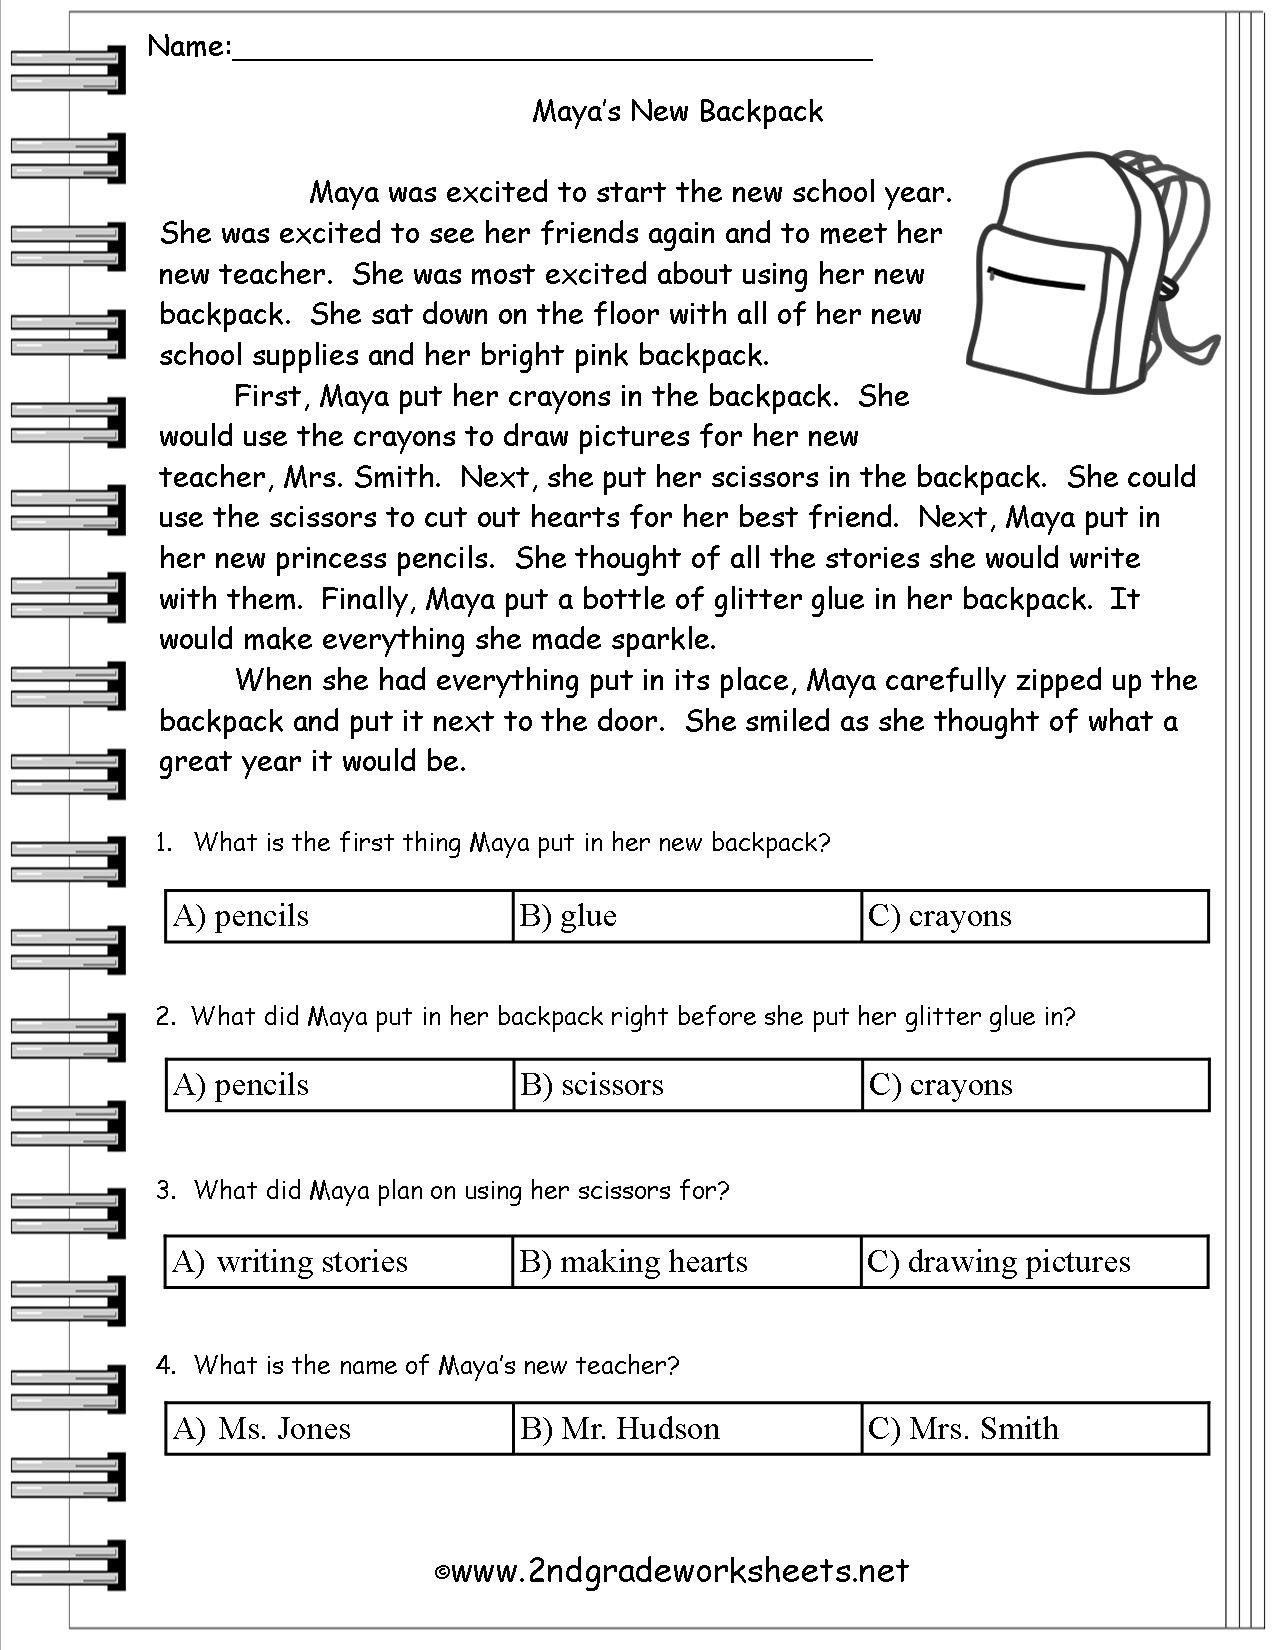 Theme Worksheets 2nd Grade Free Back to School Worksheets and Printouts